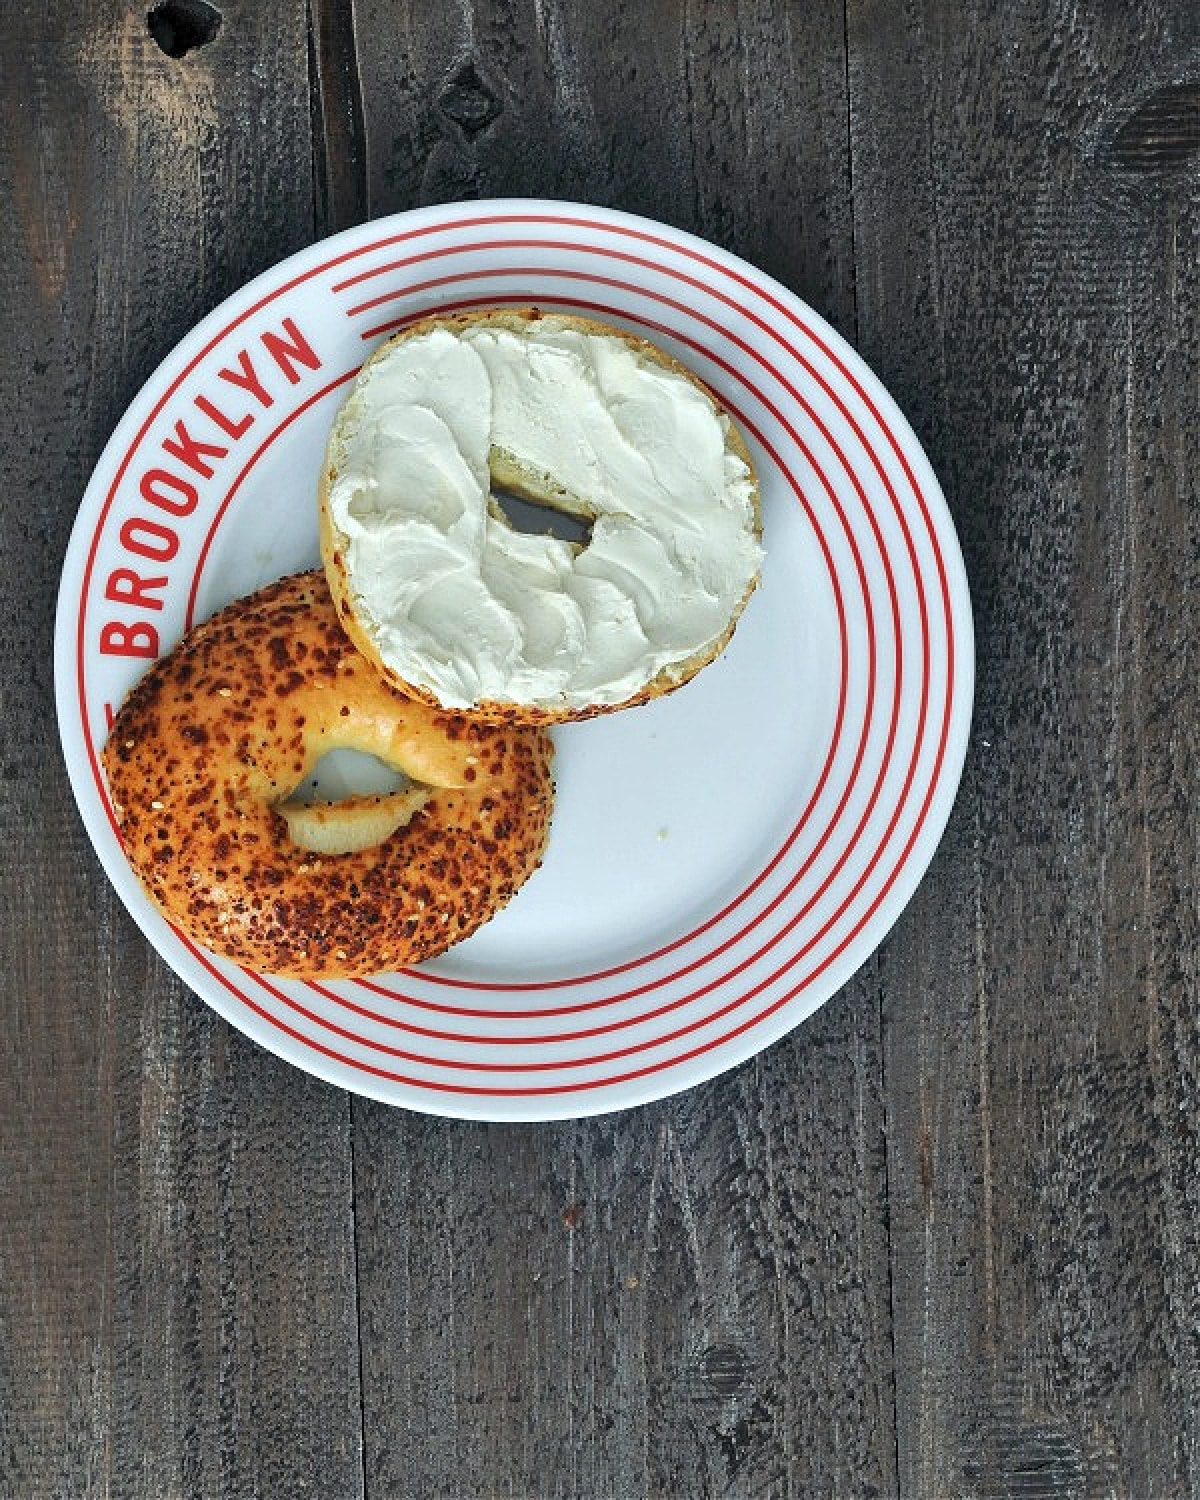 Dairy free cream cheese spread on a bagel, on a white plate that says BROOKLYN in red.